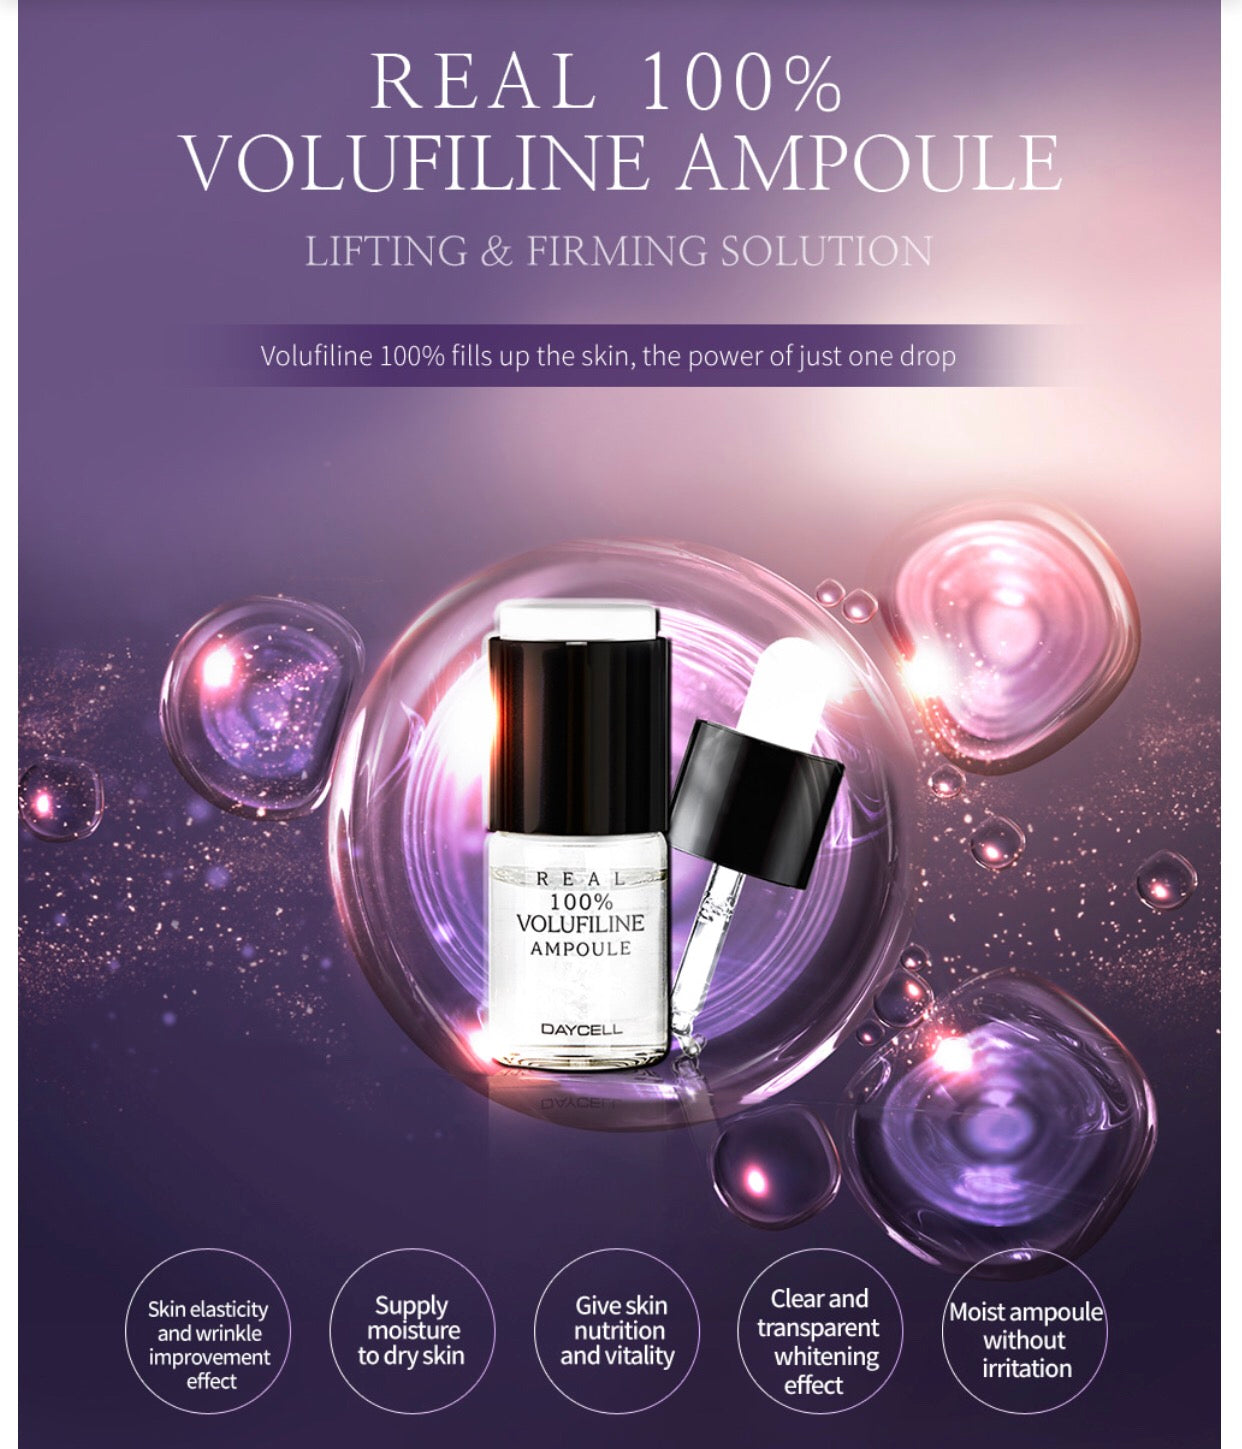 Real 100% Volufiline Ampoule